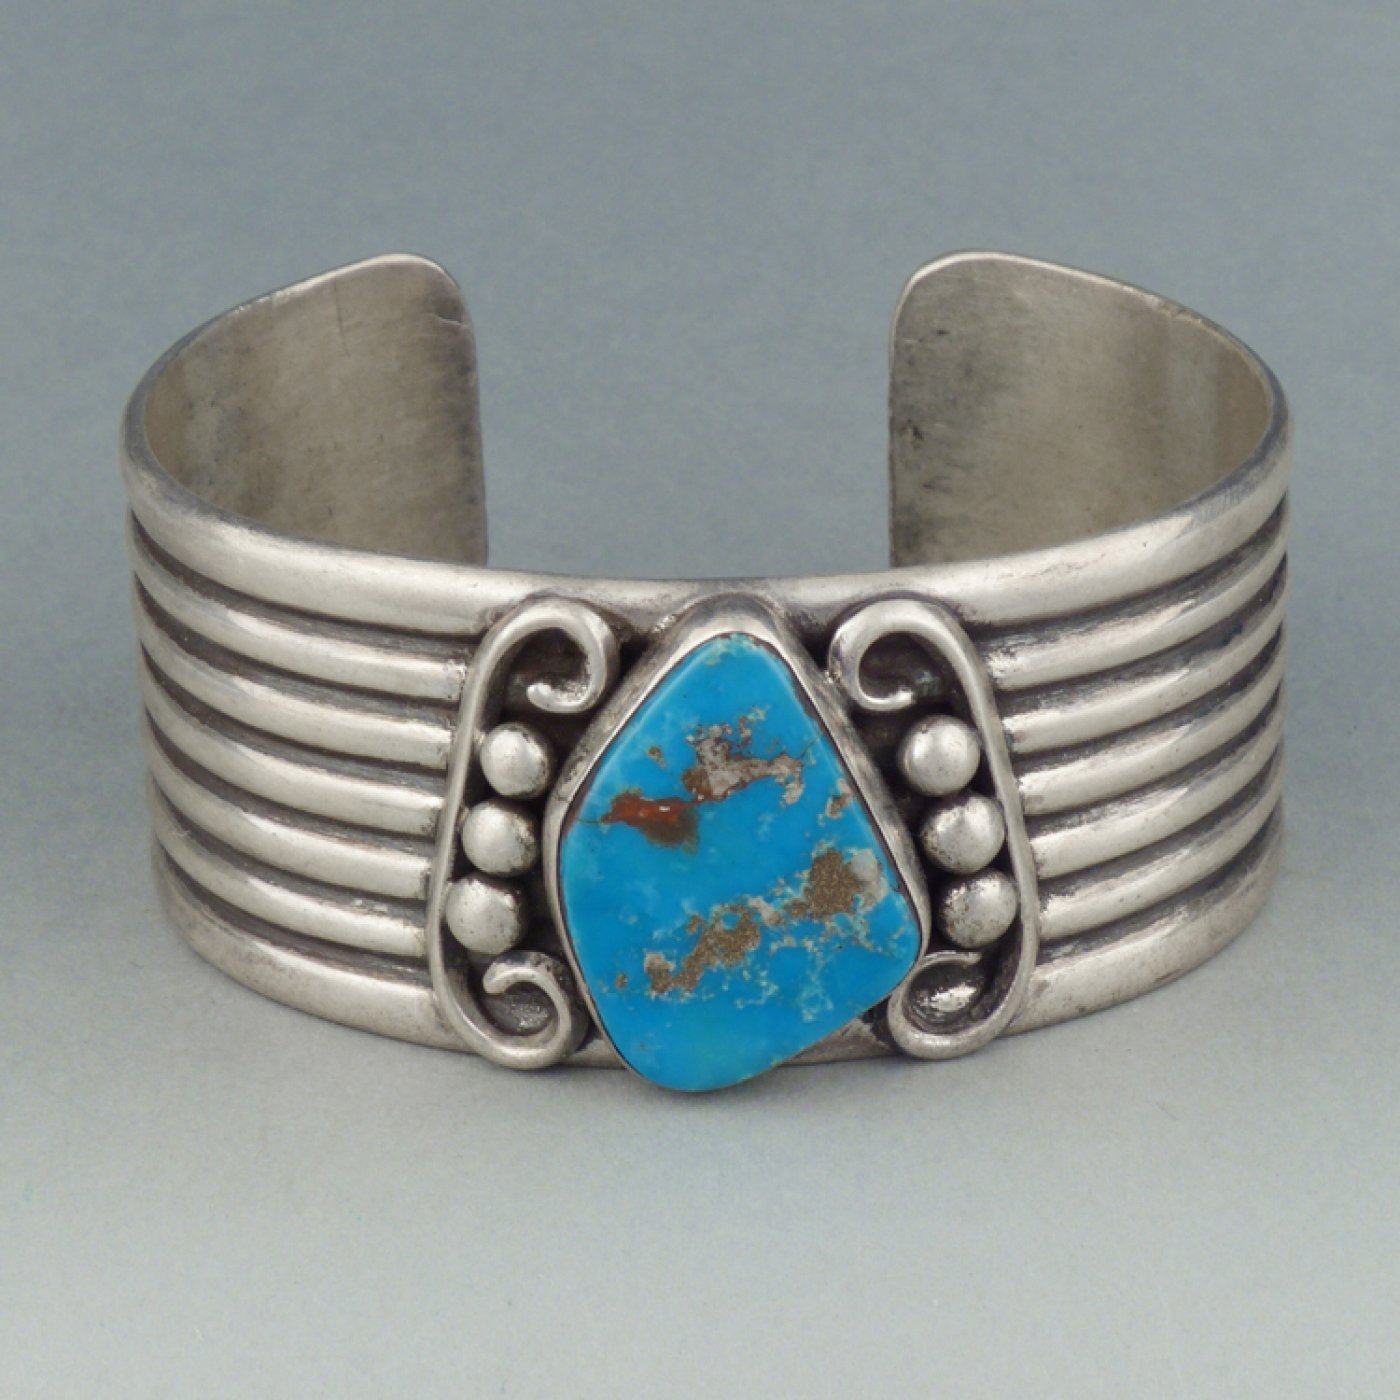 Navajo Silver Chiseled Cuff with Turquoise Cabochon c.1970 | Shiprock ...